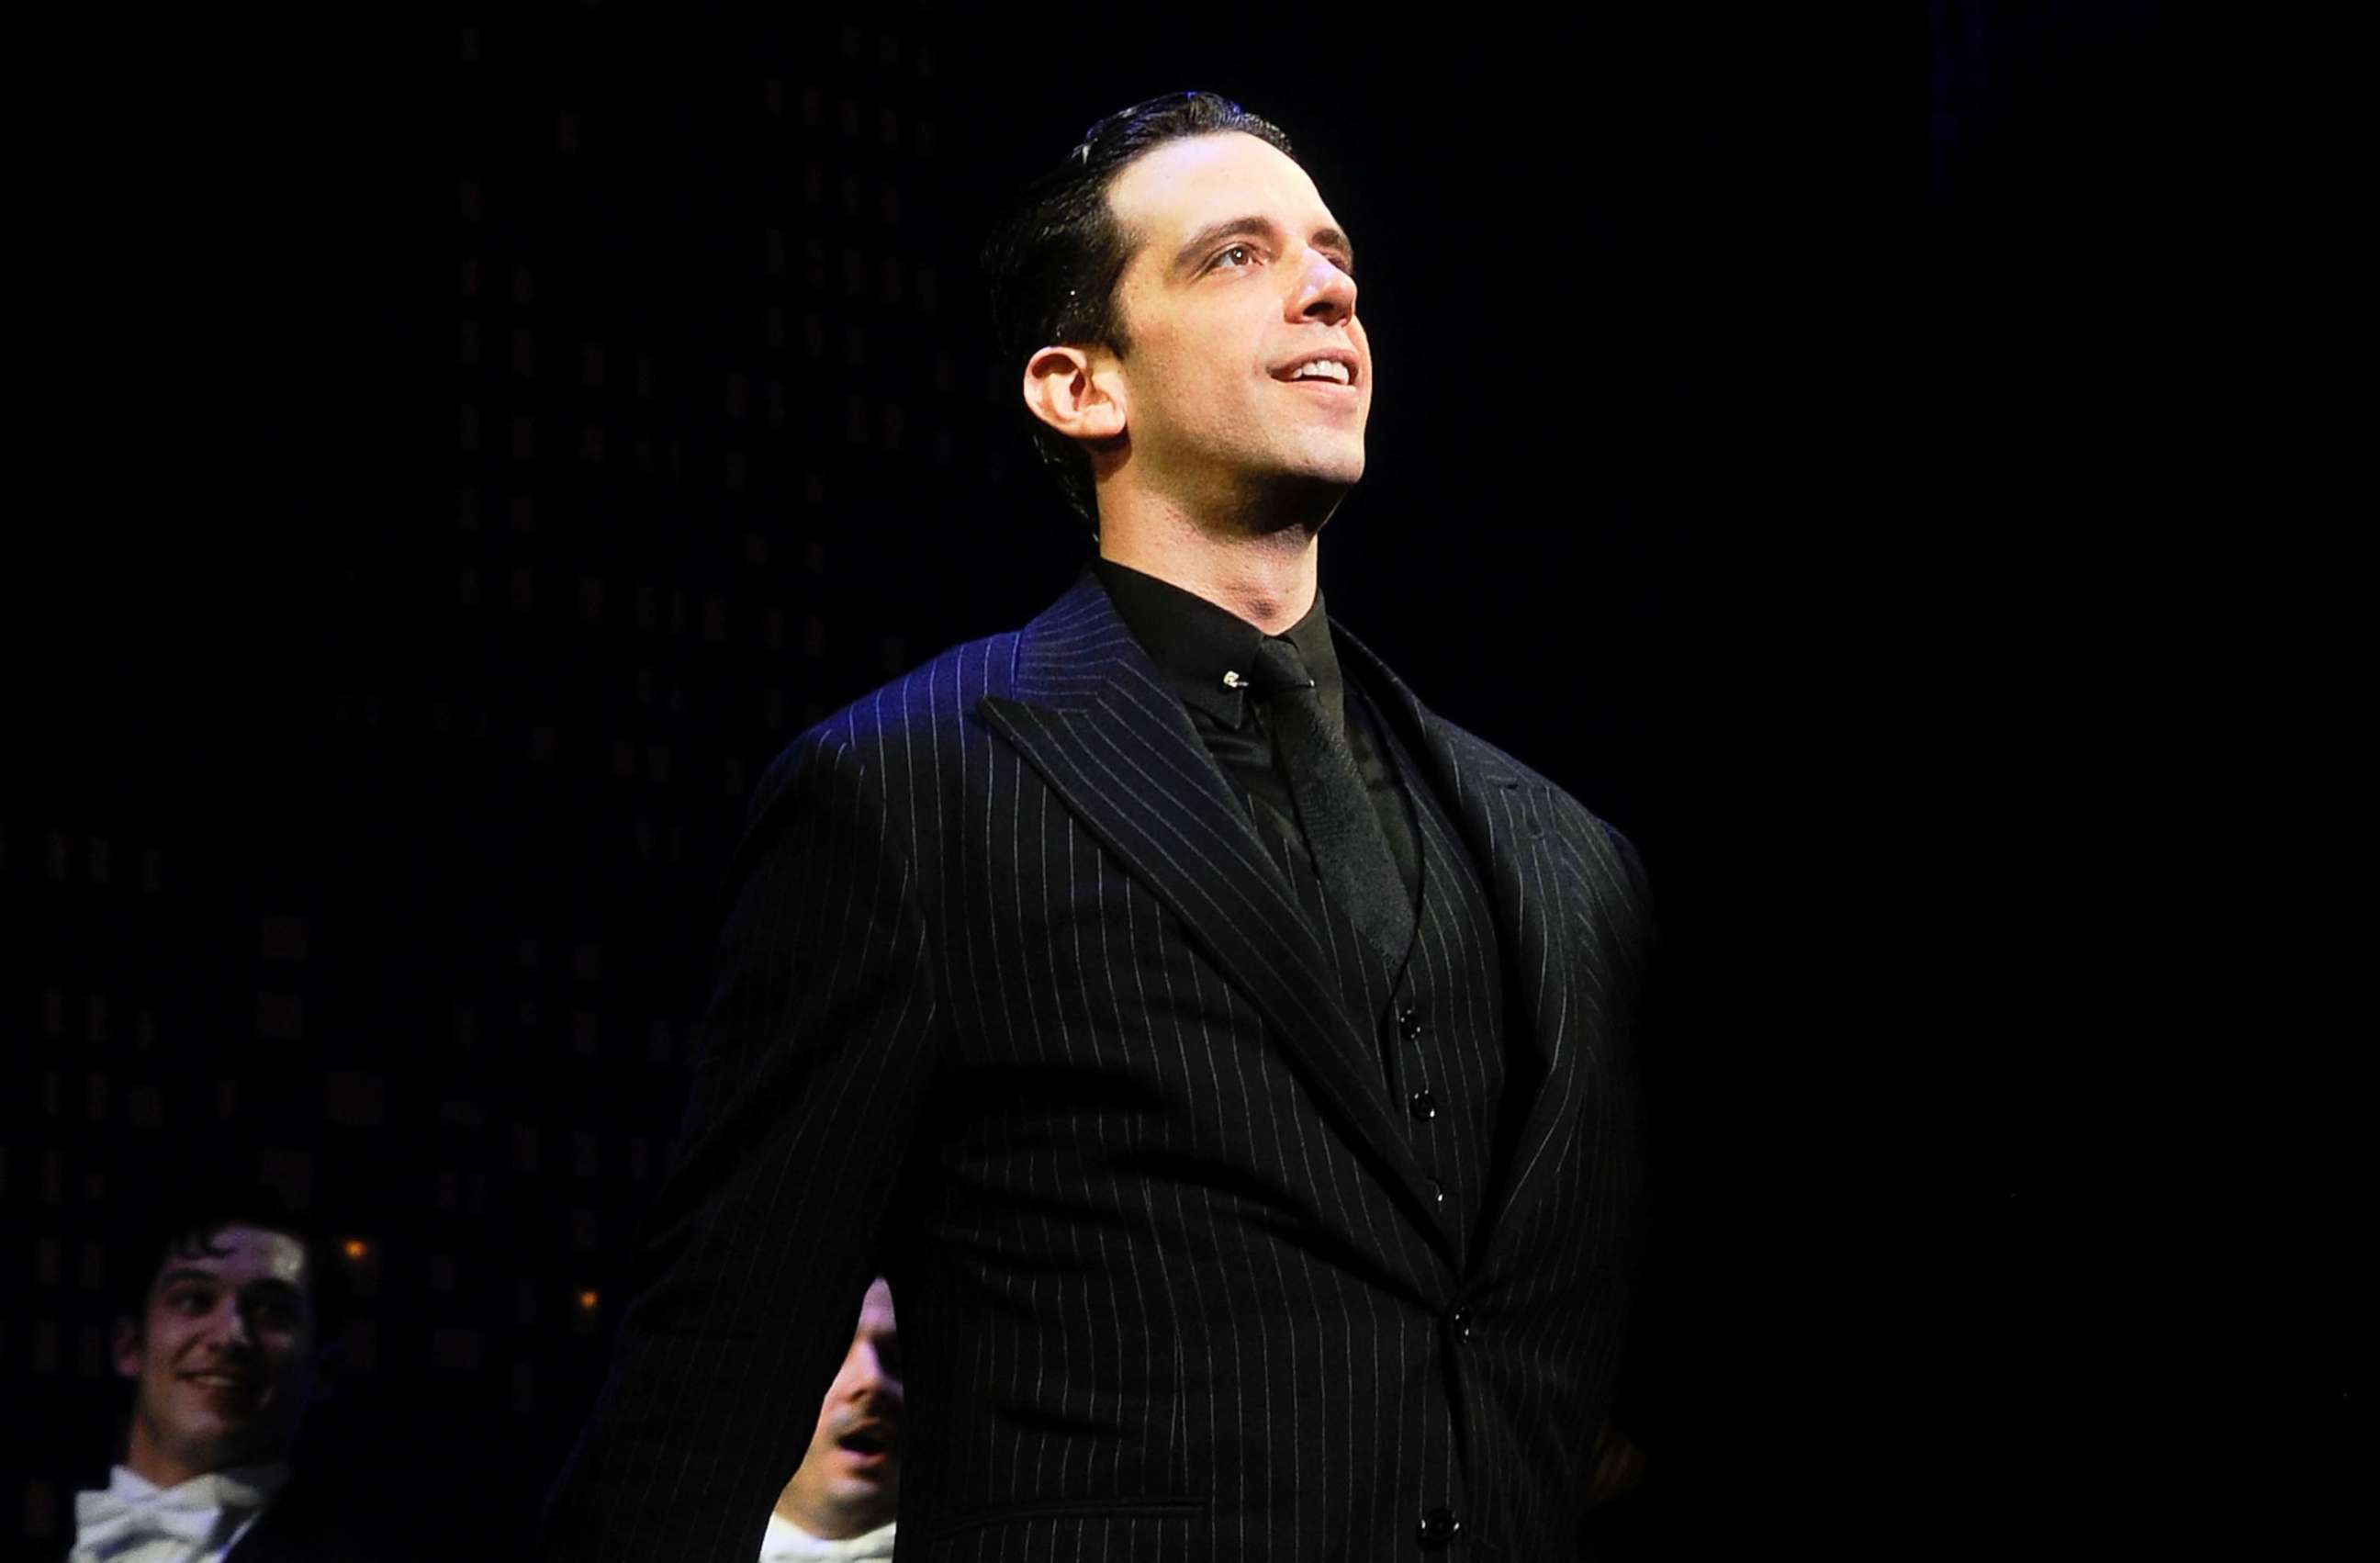 PHOTO: In this April 10, 2014, file photo, Nick Cordero performs during the "Bullets Over Broadway" opening night curtain call at St. James Theatre in New York.